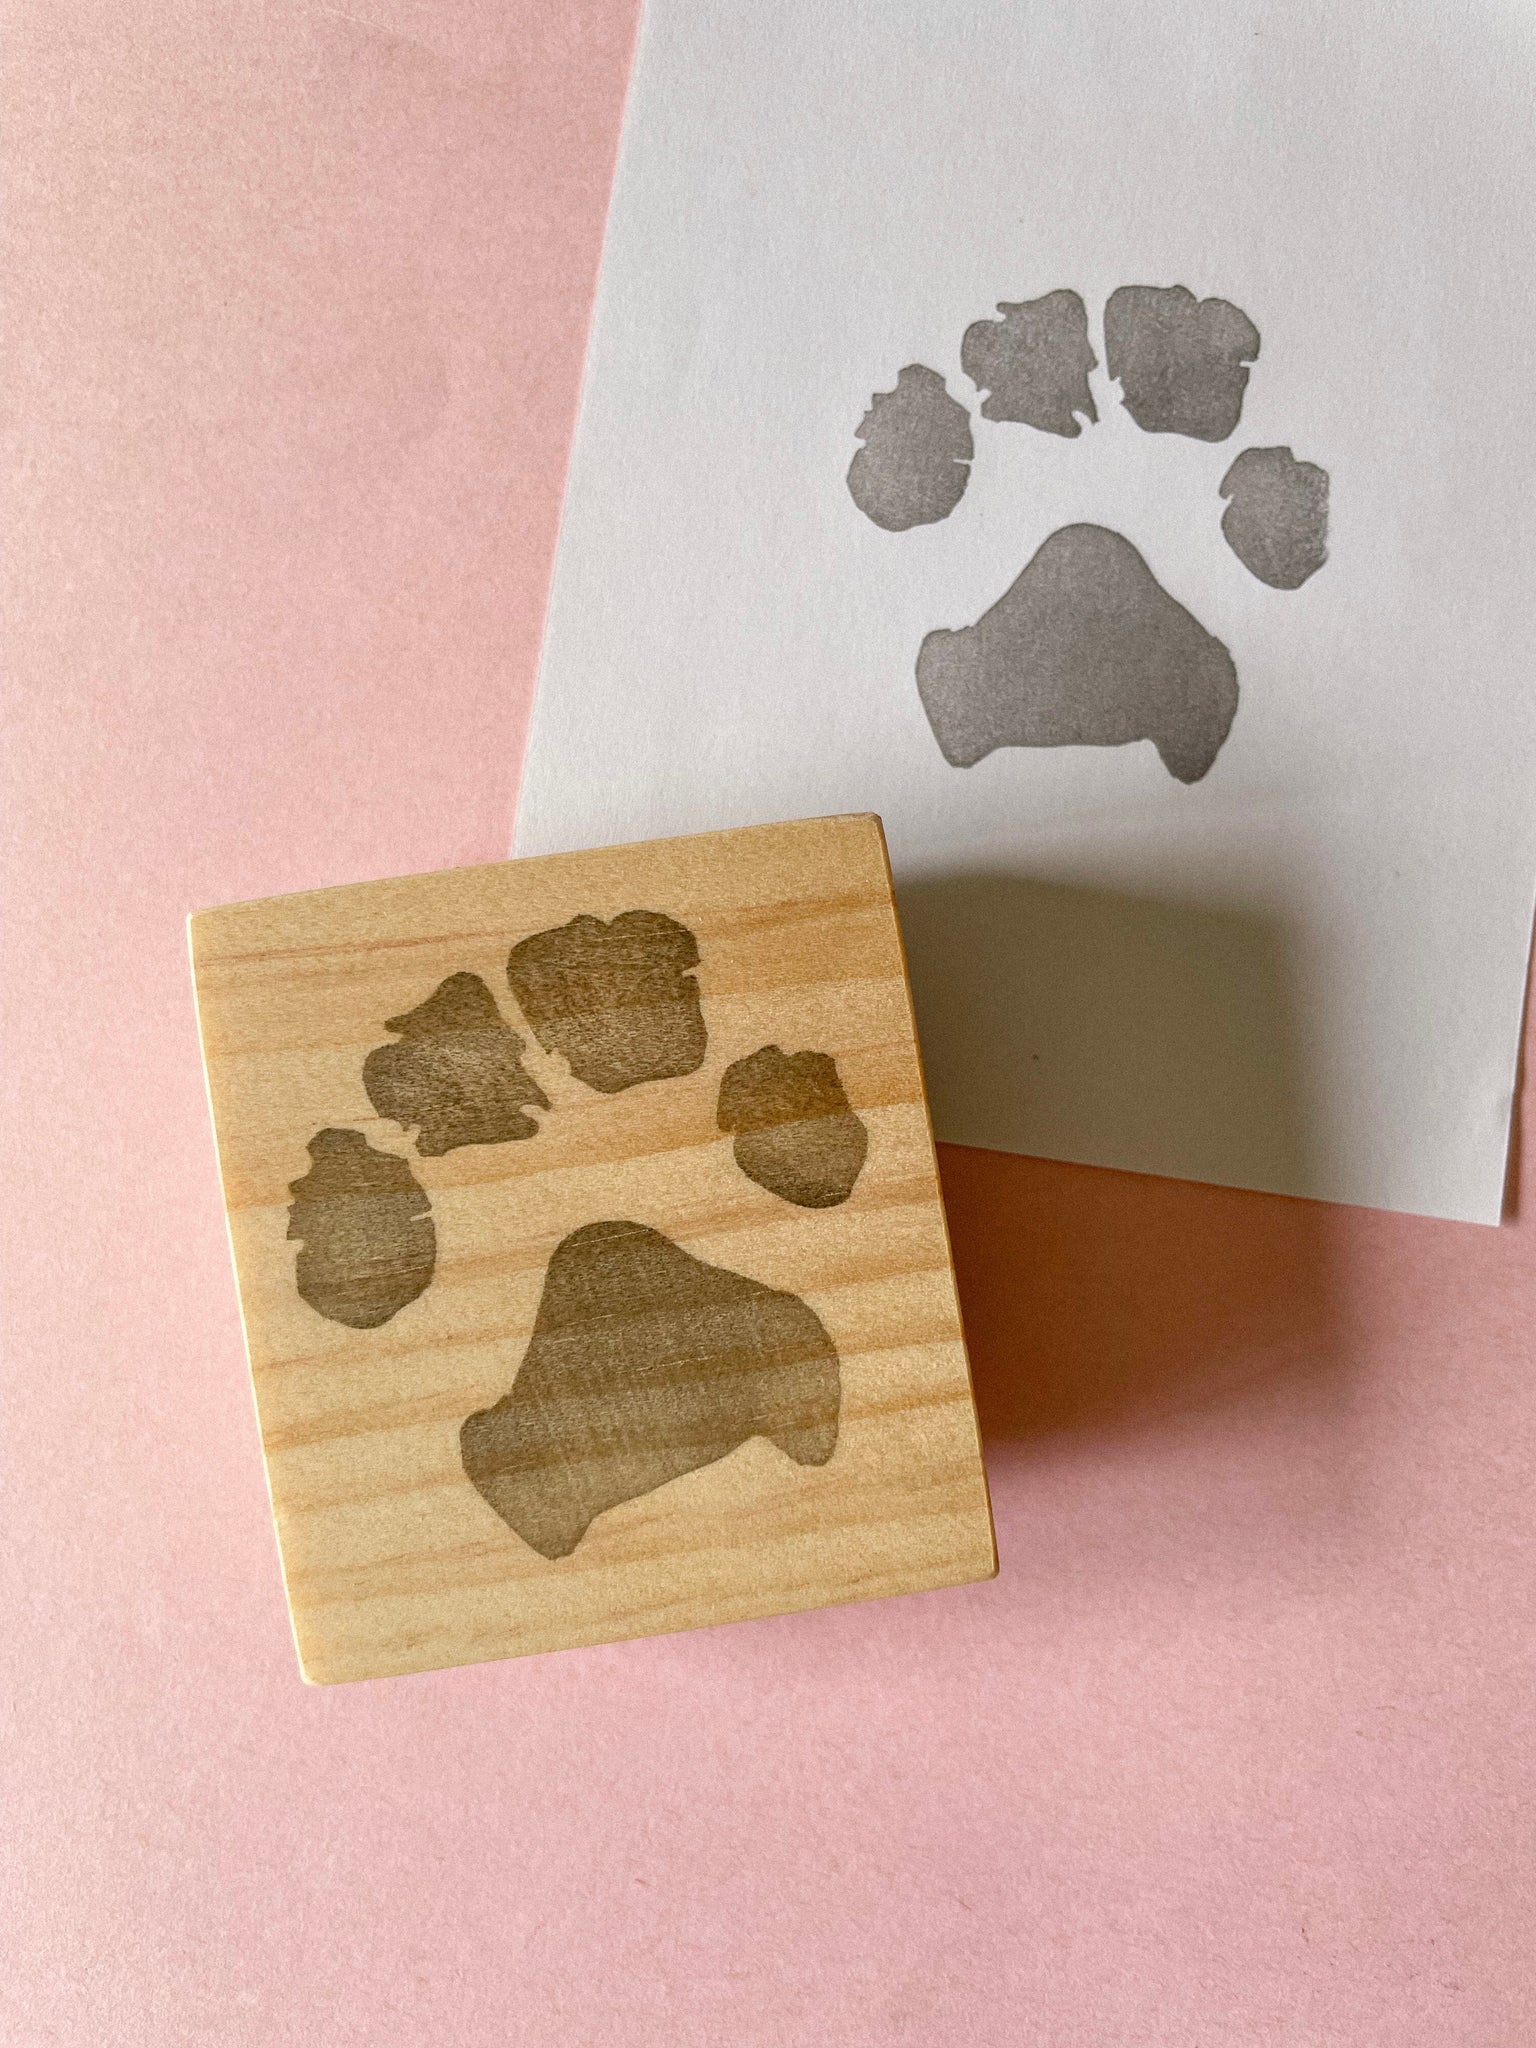 Paw Print Rubber Stamp on Wood Block for Stamping Crafting